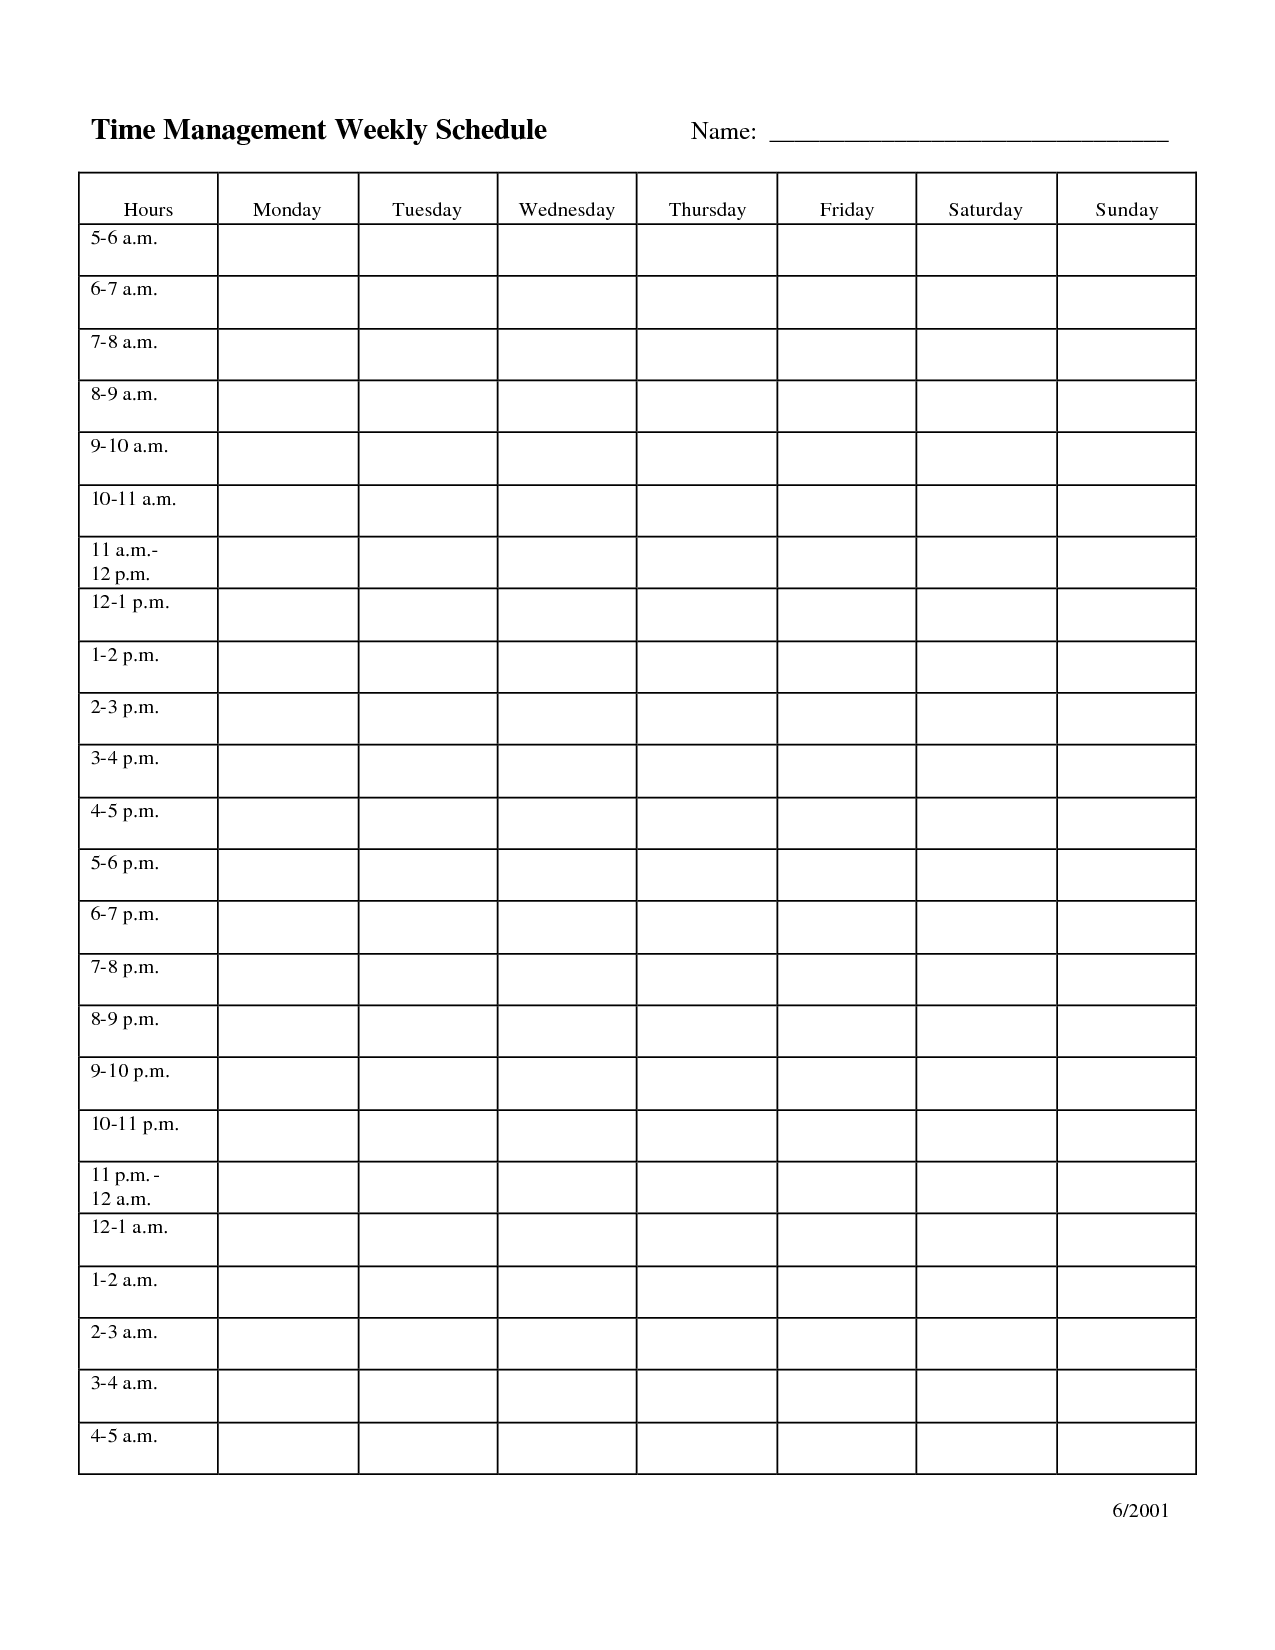 sample of time management schedule template